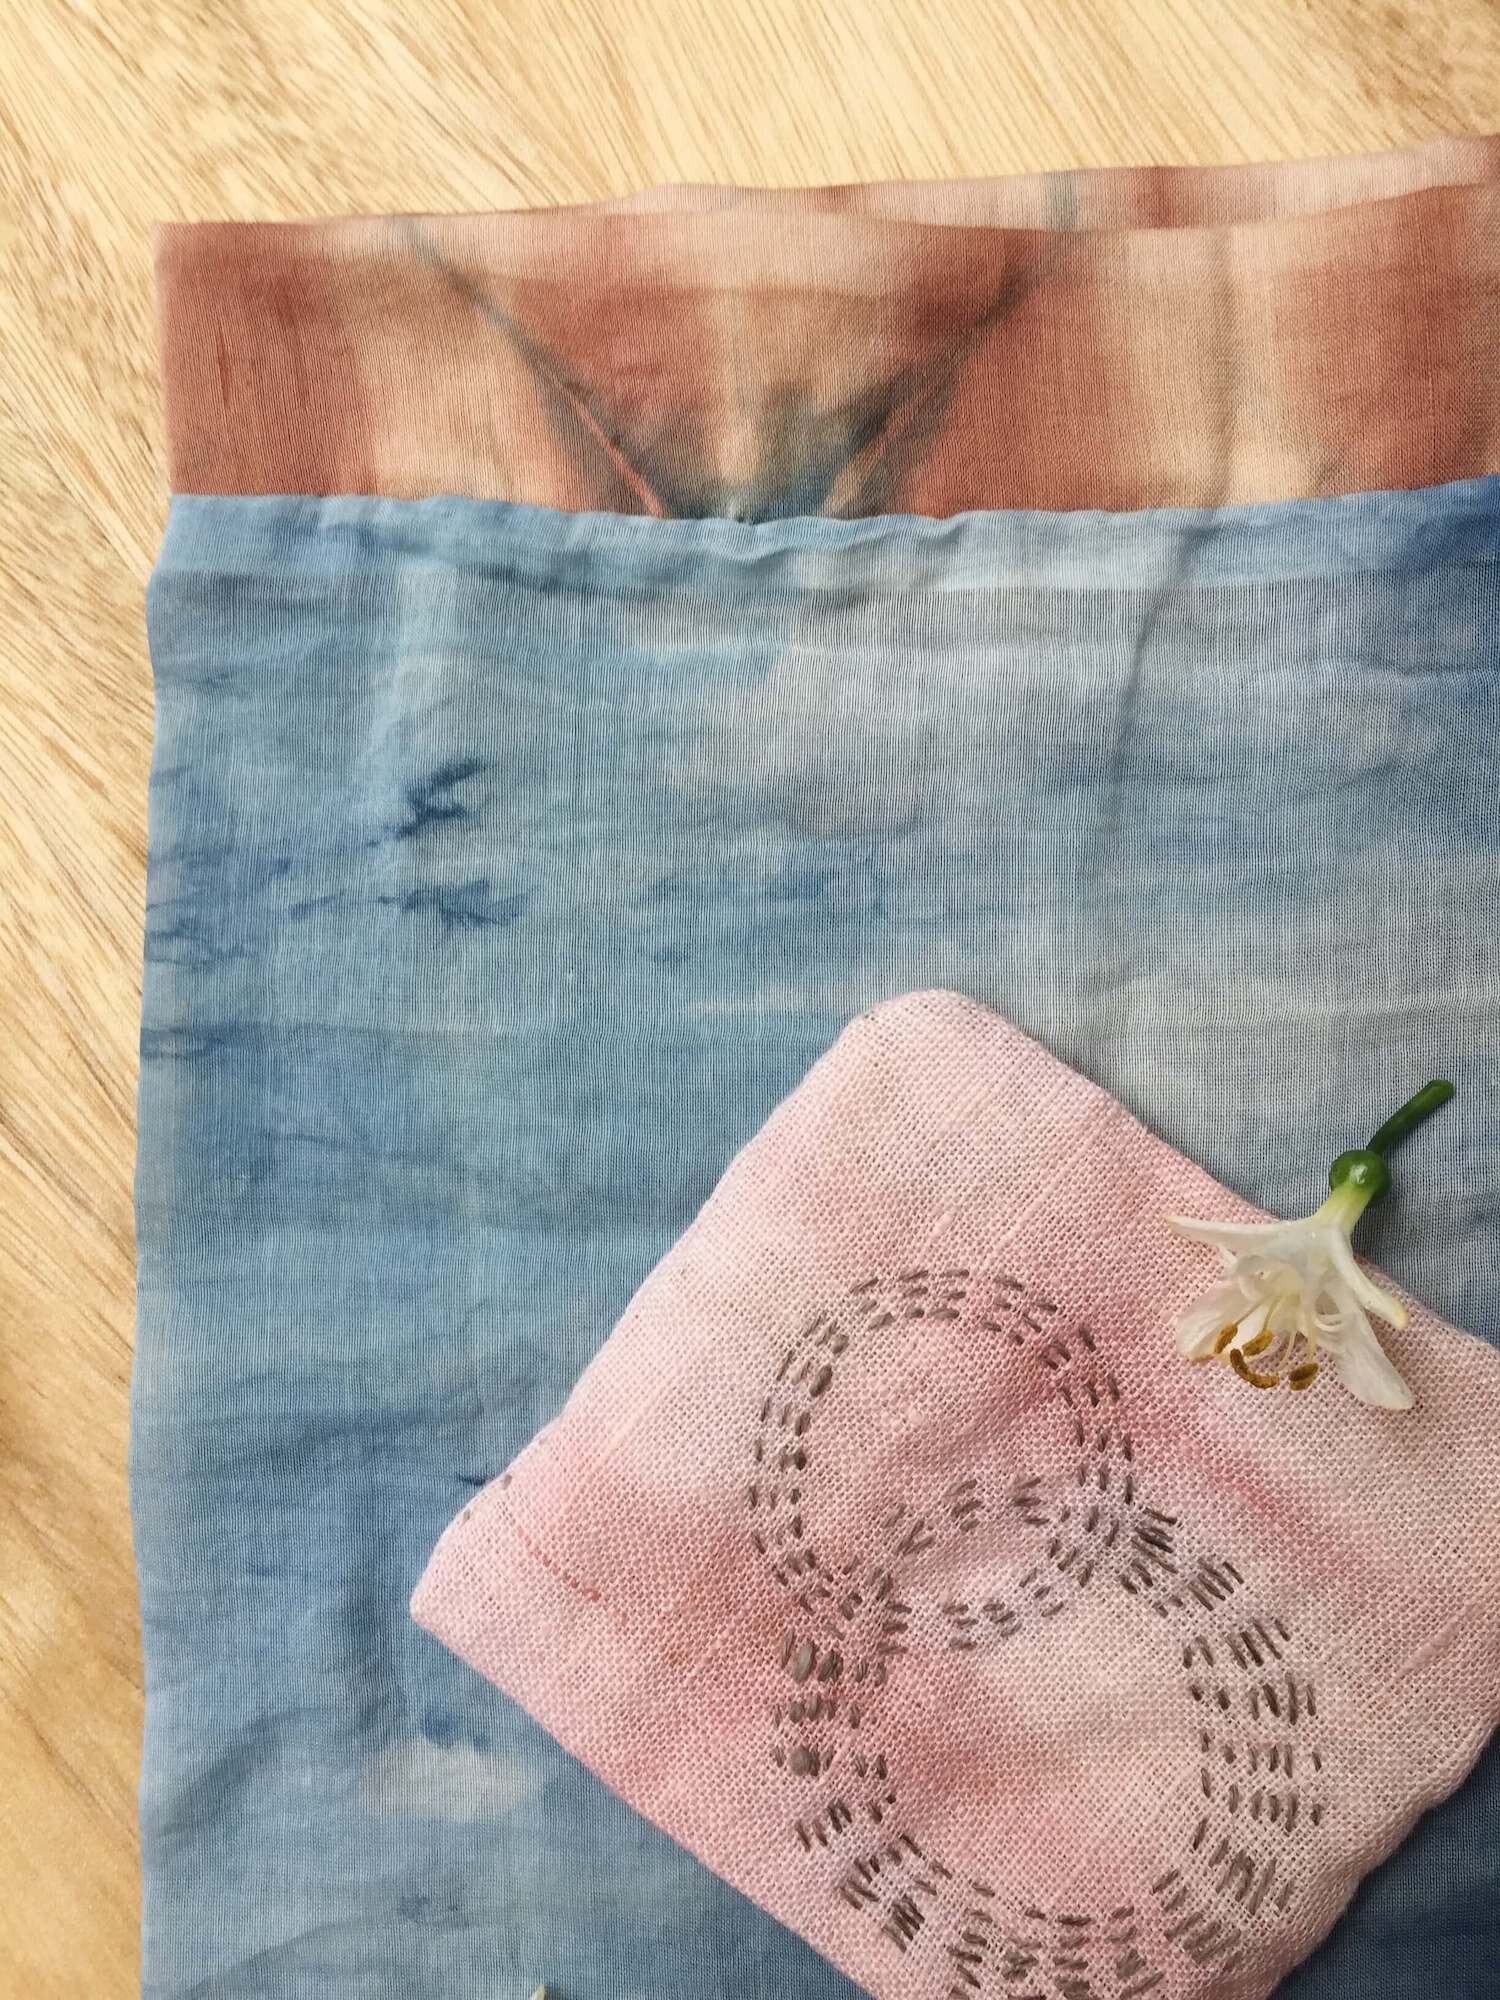 10 things to make with your slow stitching pieces — petalplum